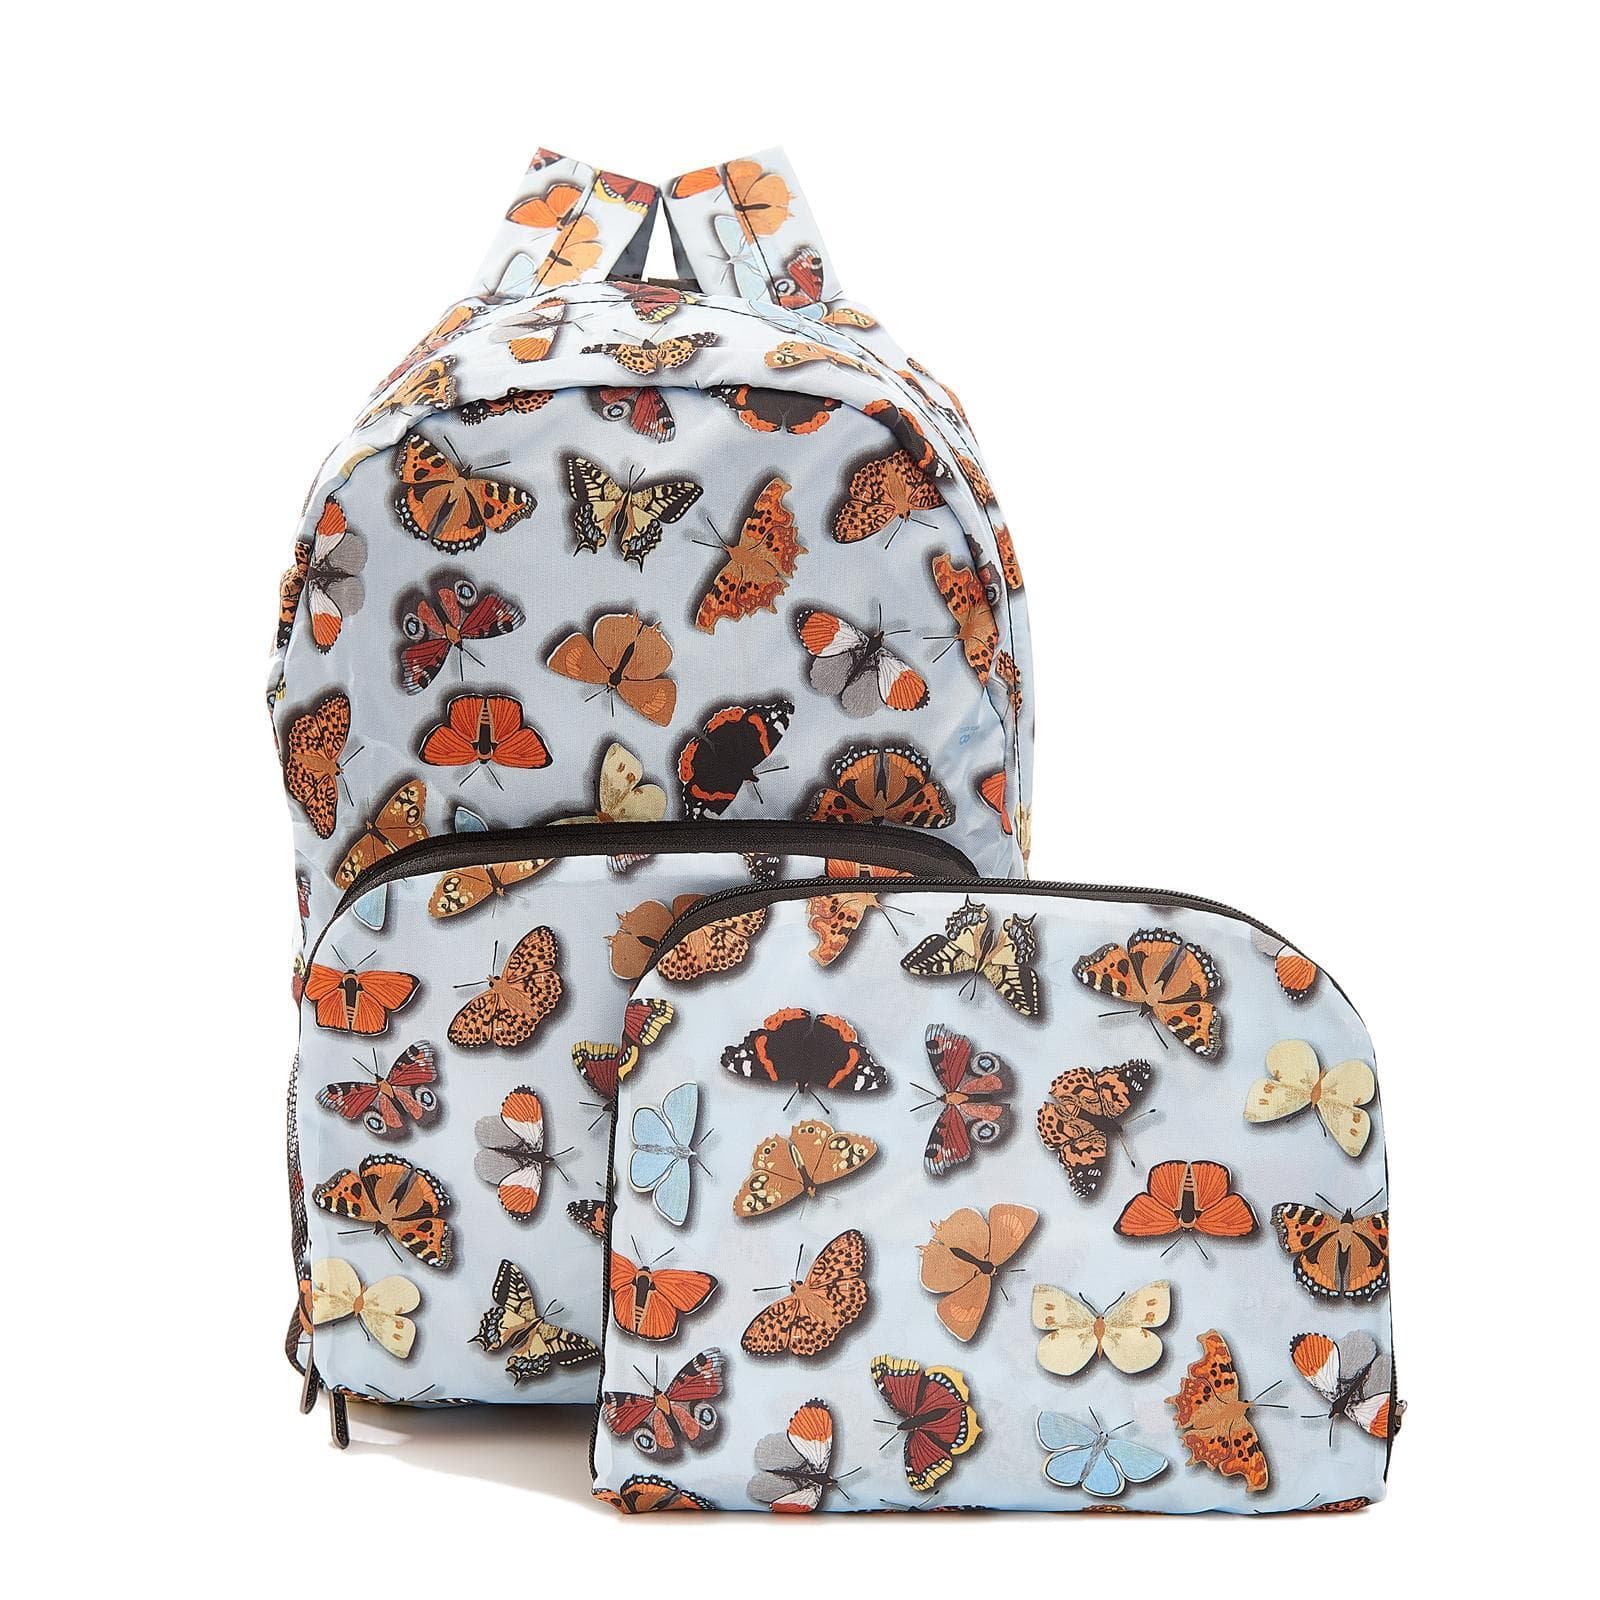 Eco Chic Blue Eco Chic Lightweight Foldable Backpack Wild Butterflies